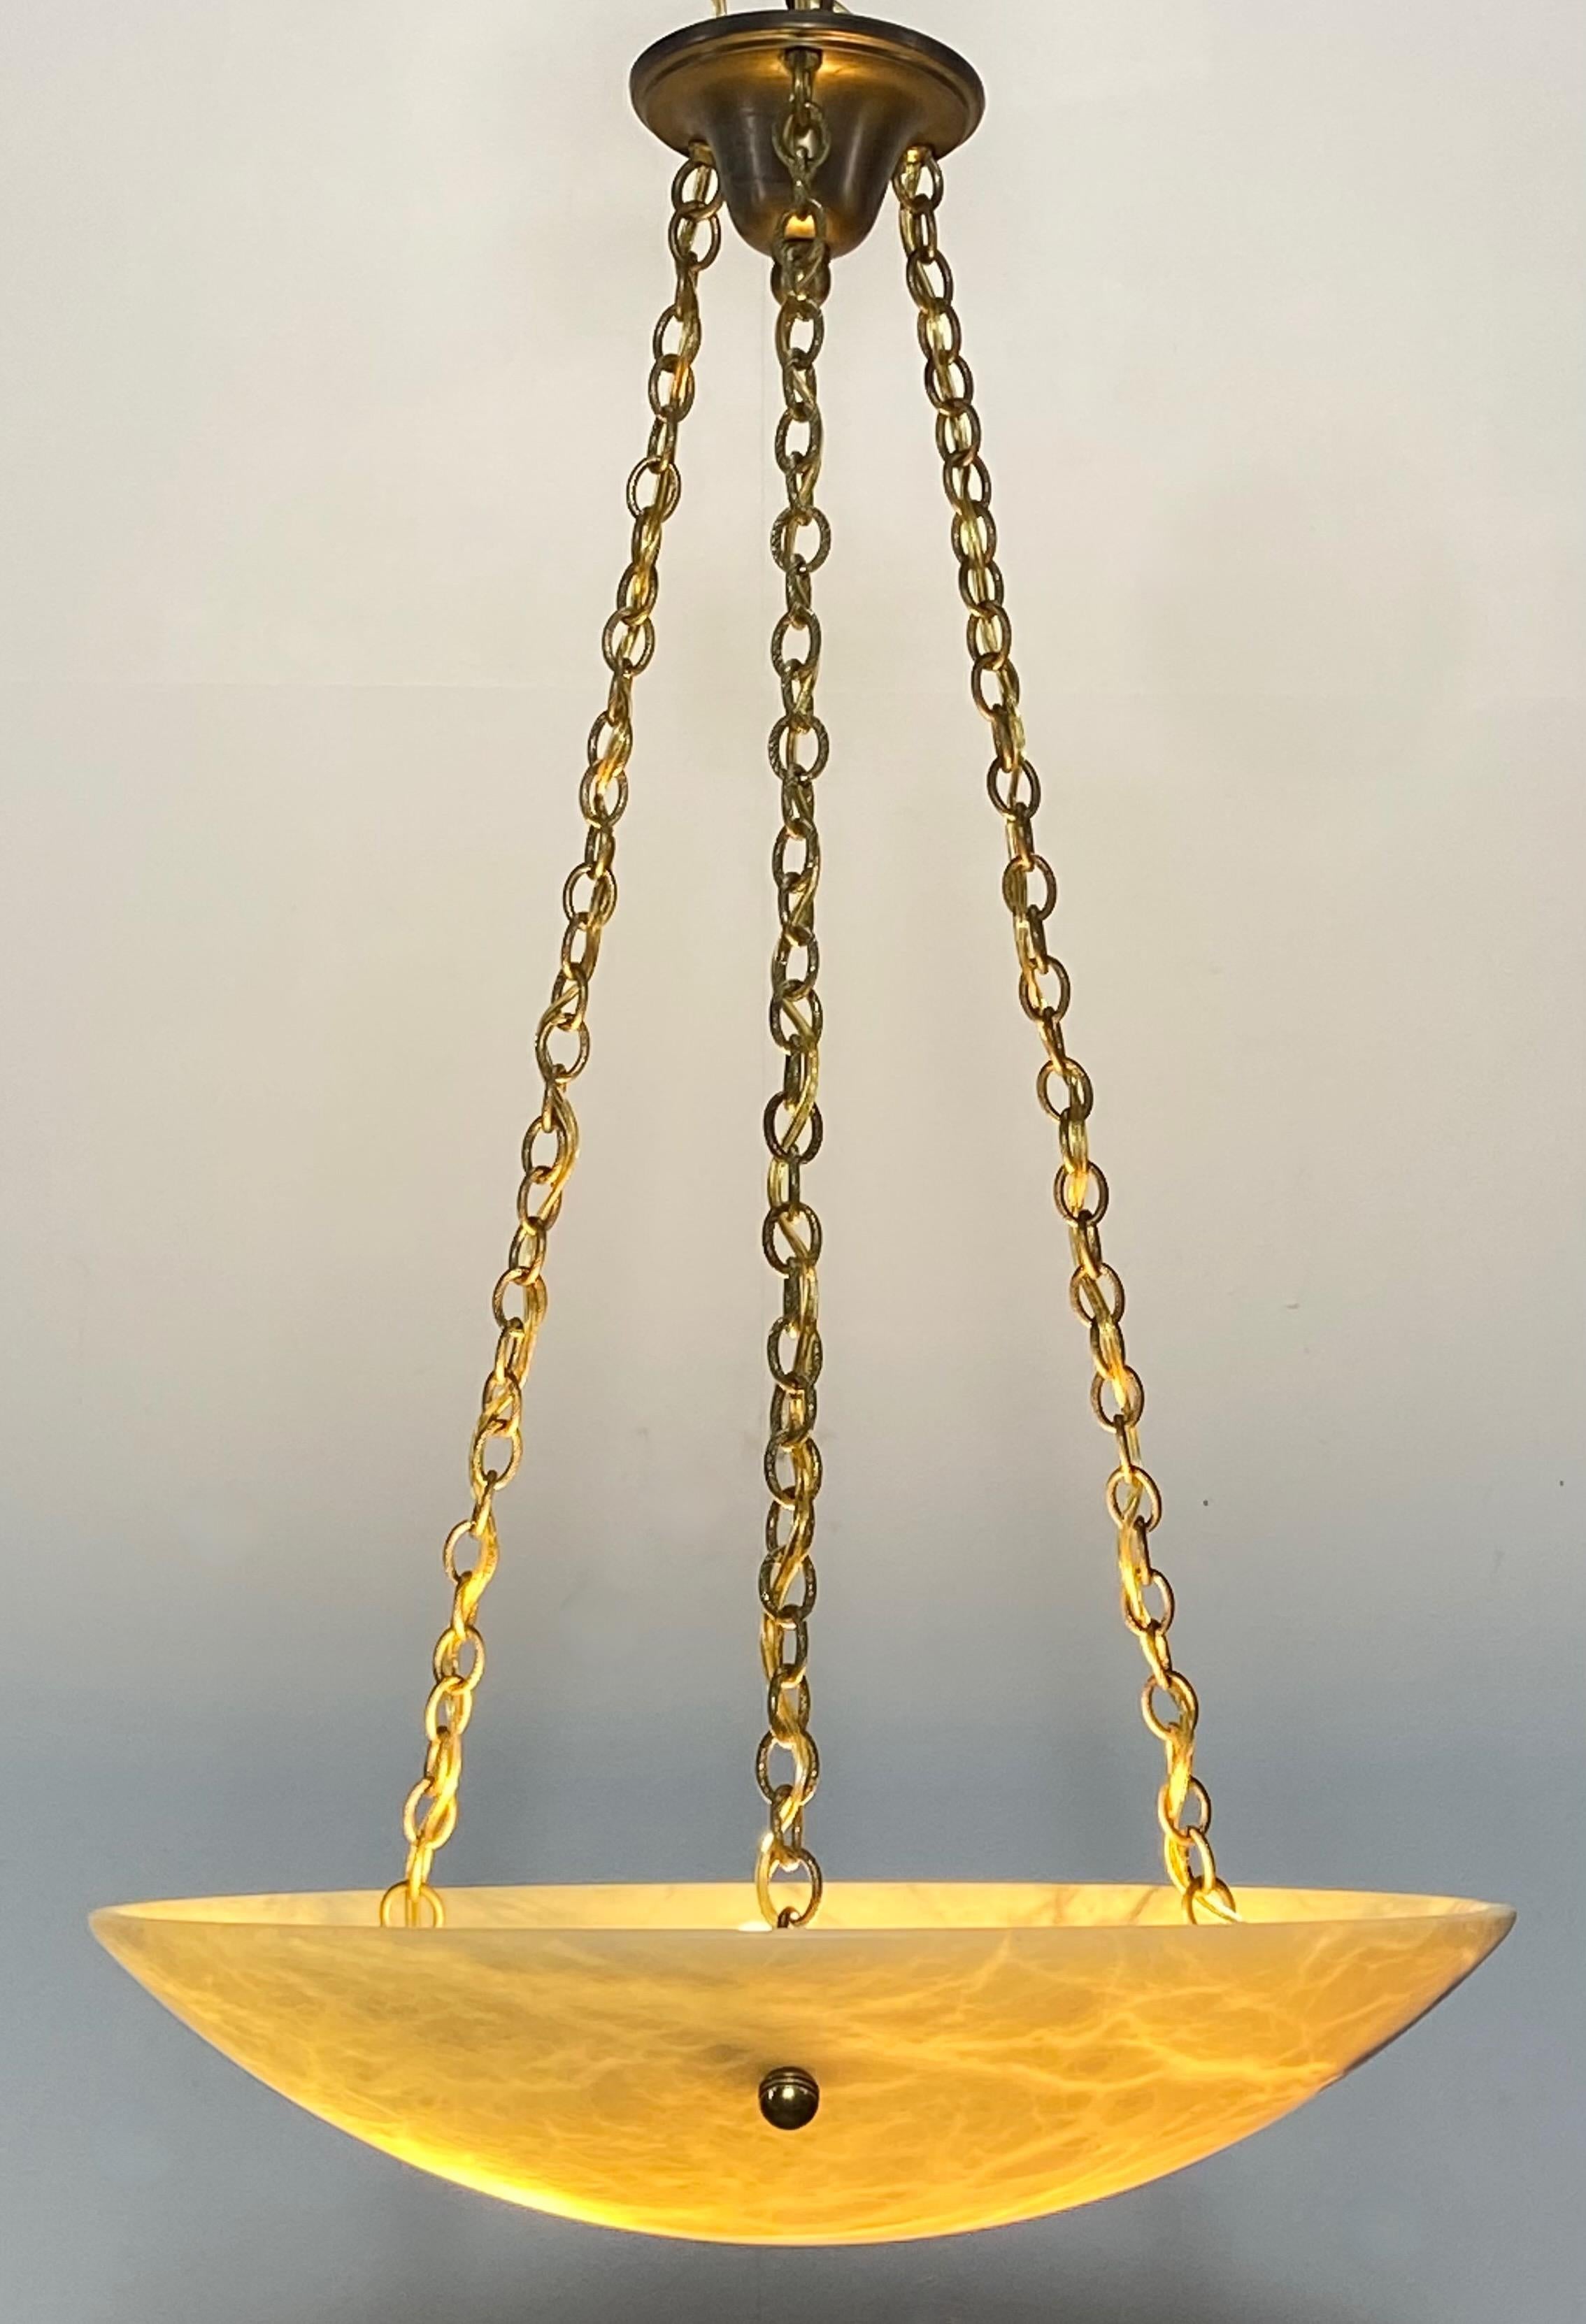 Light amber-ish color alabaster bowl shape pendant light fixture with solid brass rope style chain.
Recently re-wired and ready to install. We can adjust the the length of the drop to buyers specification if desired.
Antique alabaster bowl with